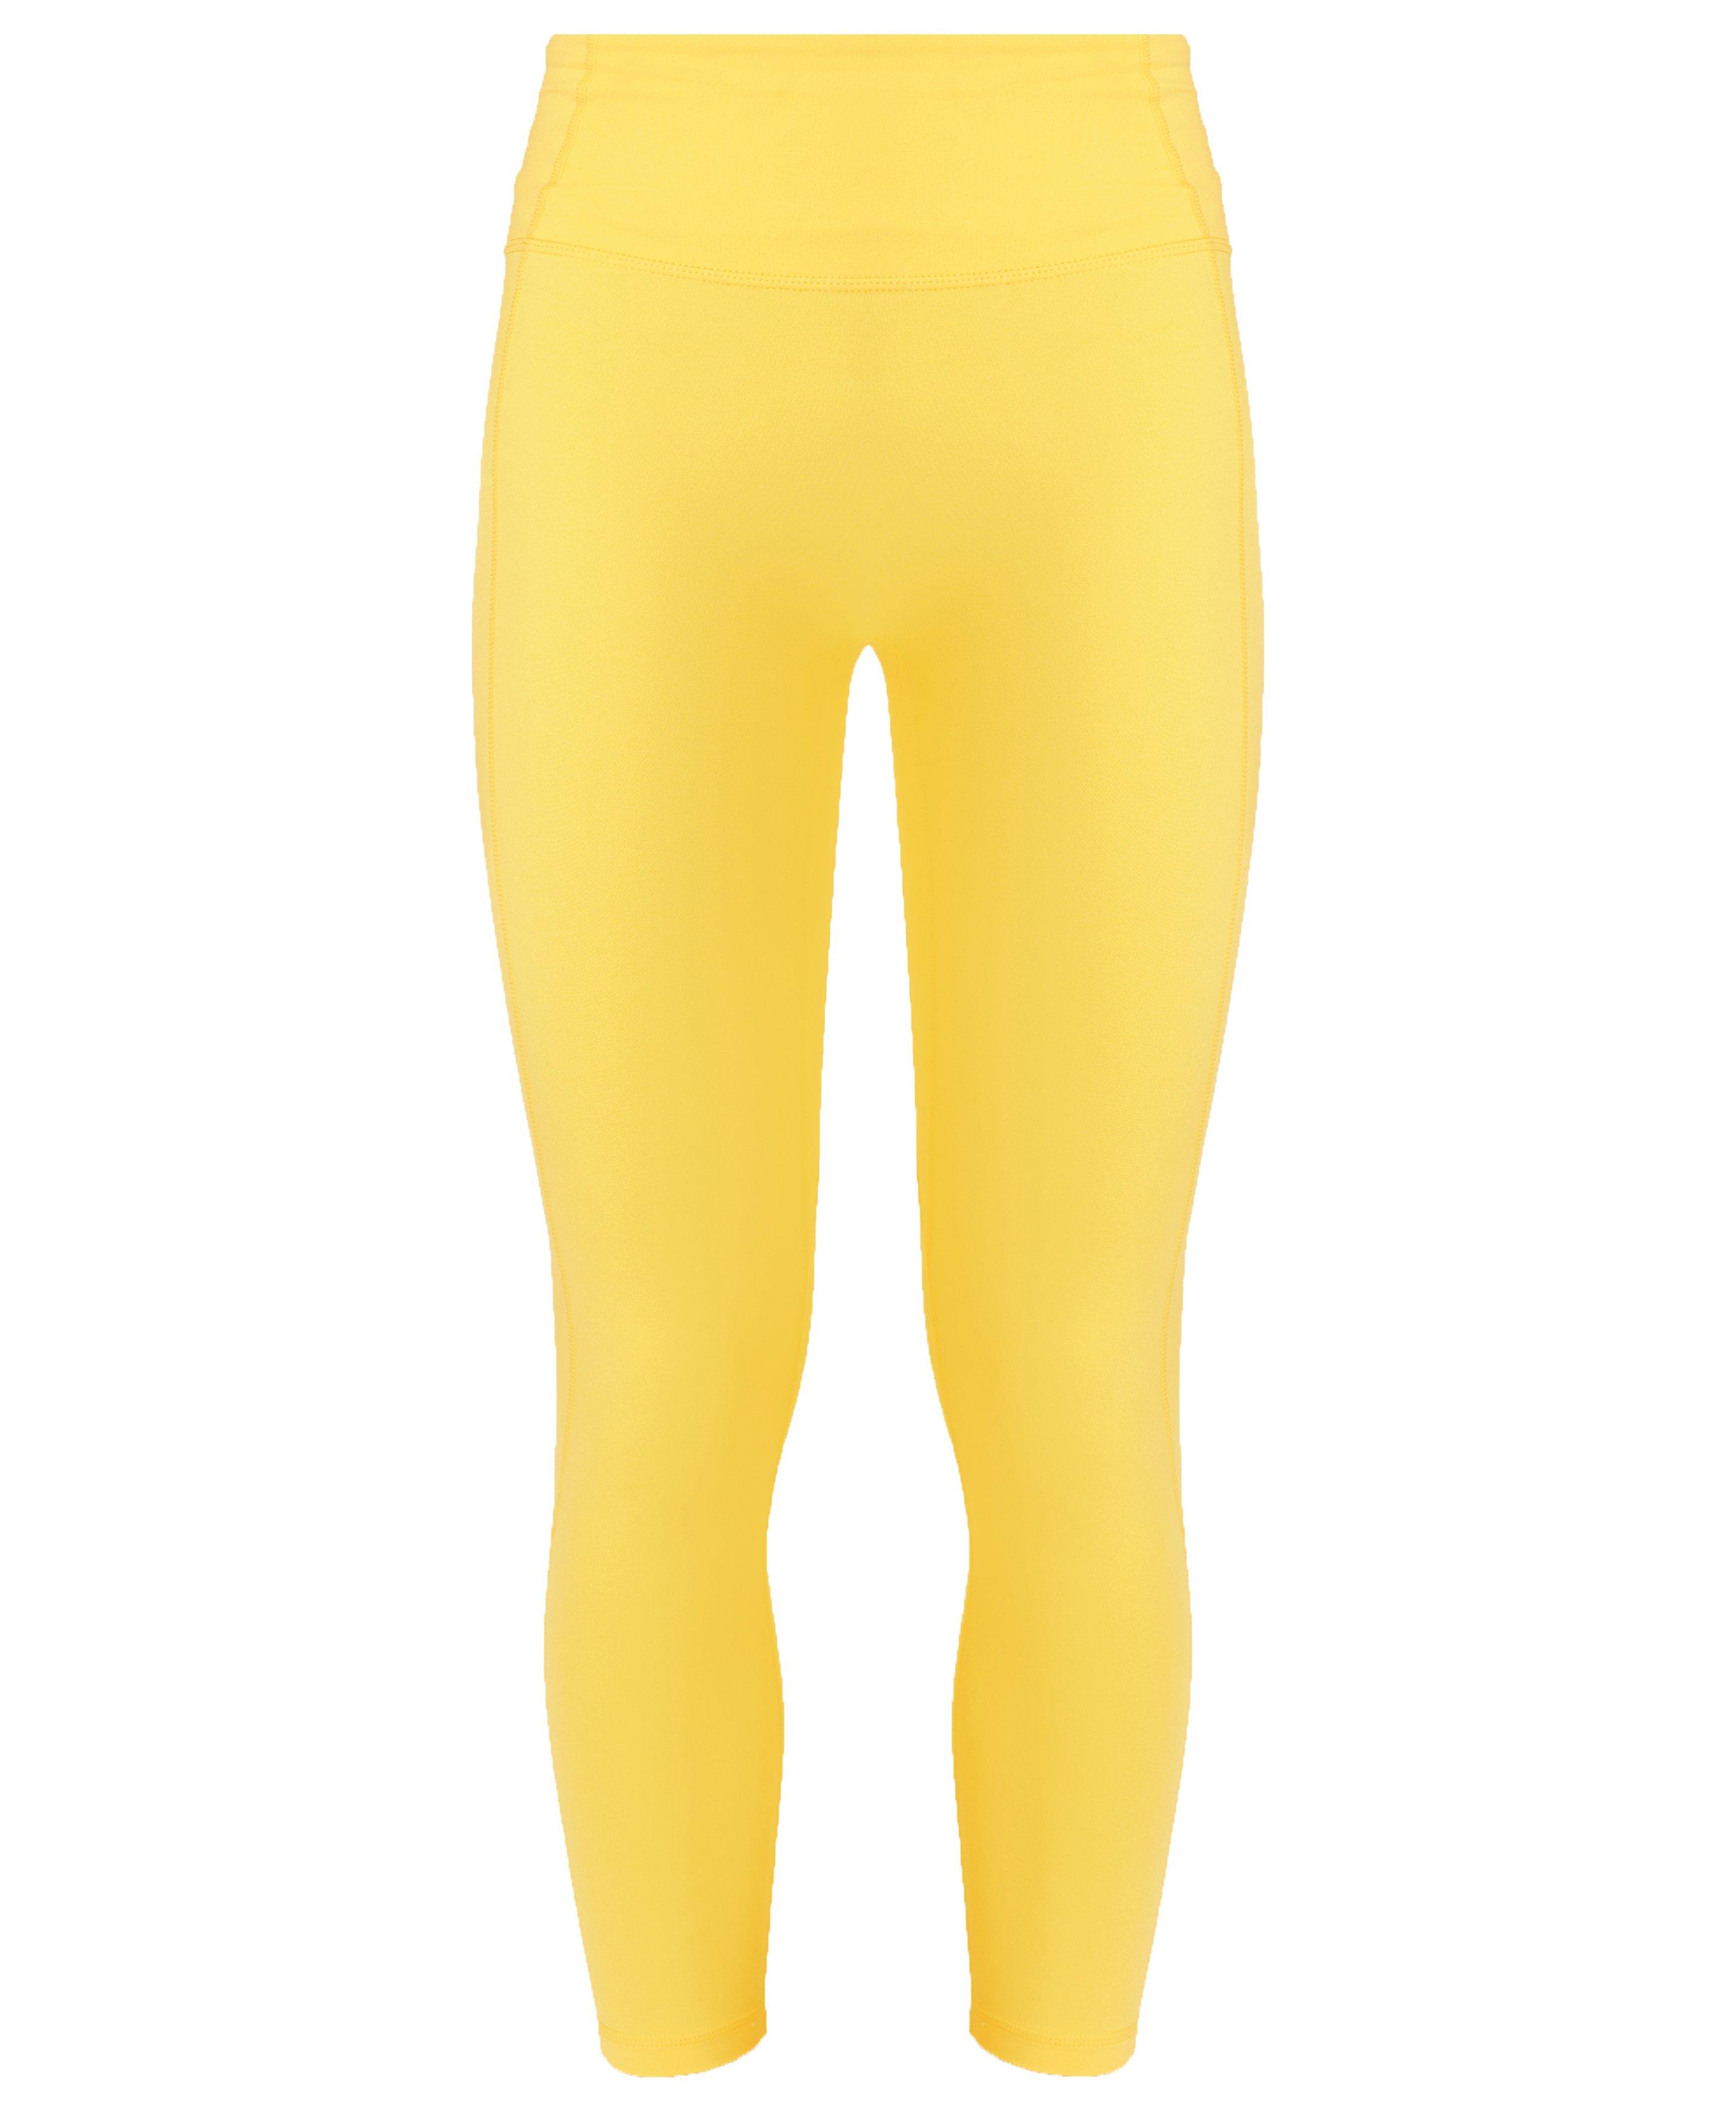 Super Soft 7/8 Leggings Colour Theory - Cheerful Yellow